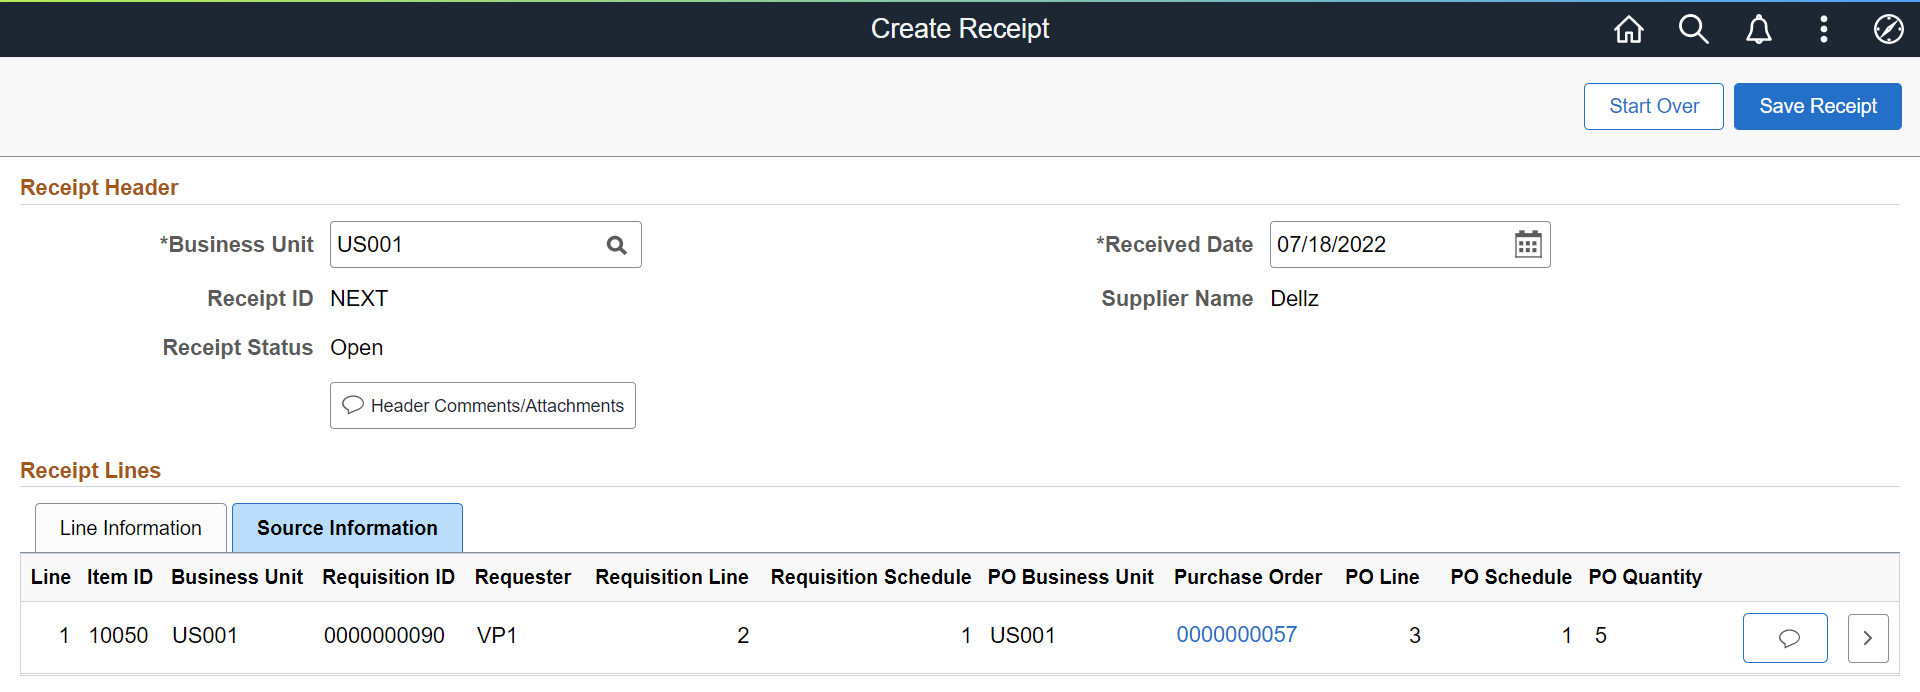 Create Receipt Source Information page